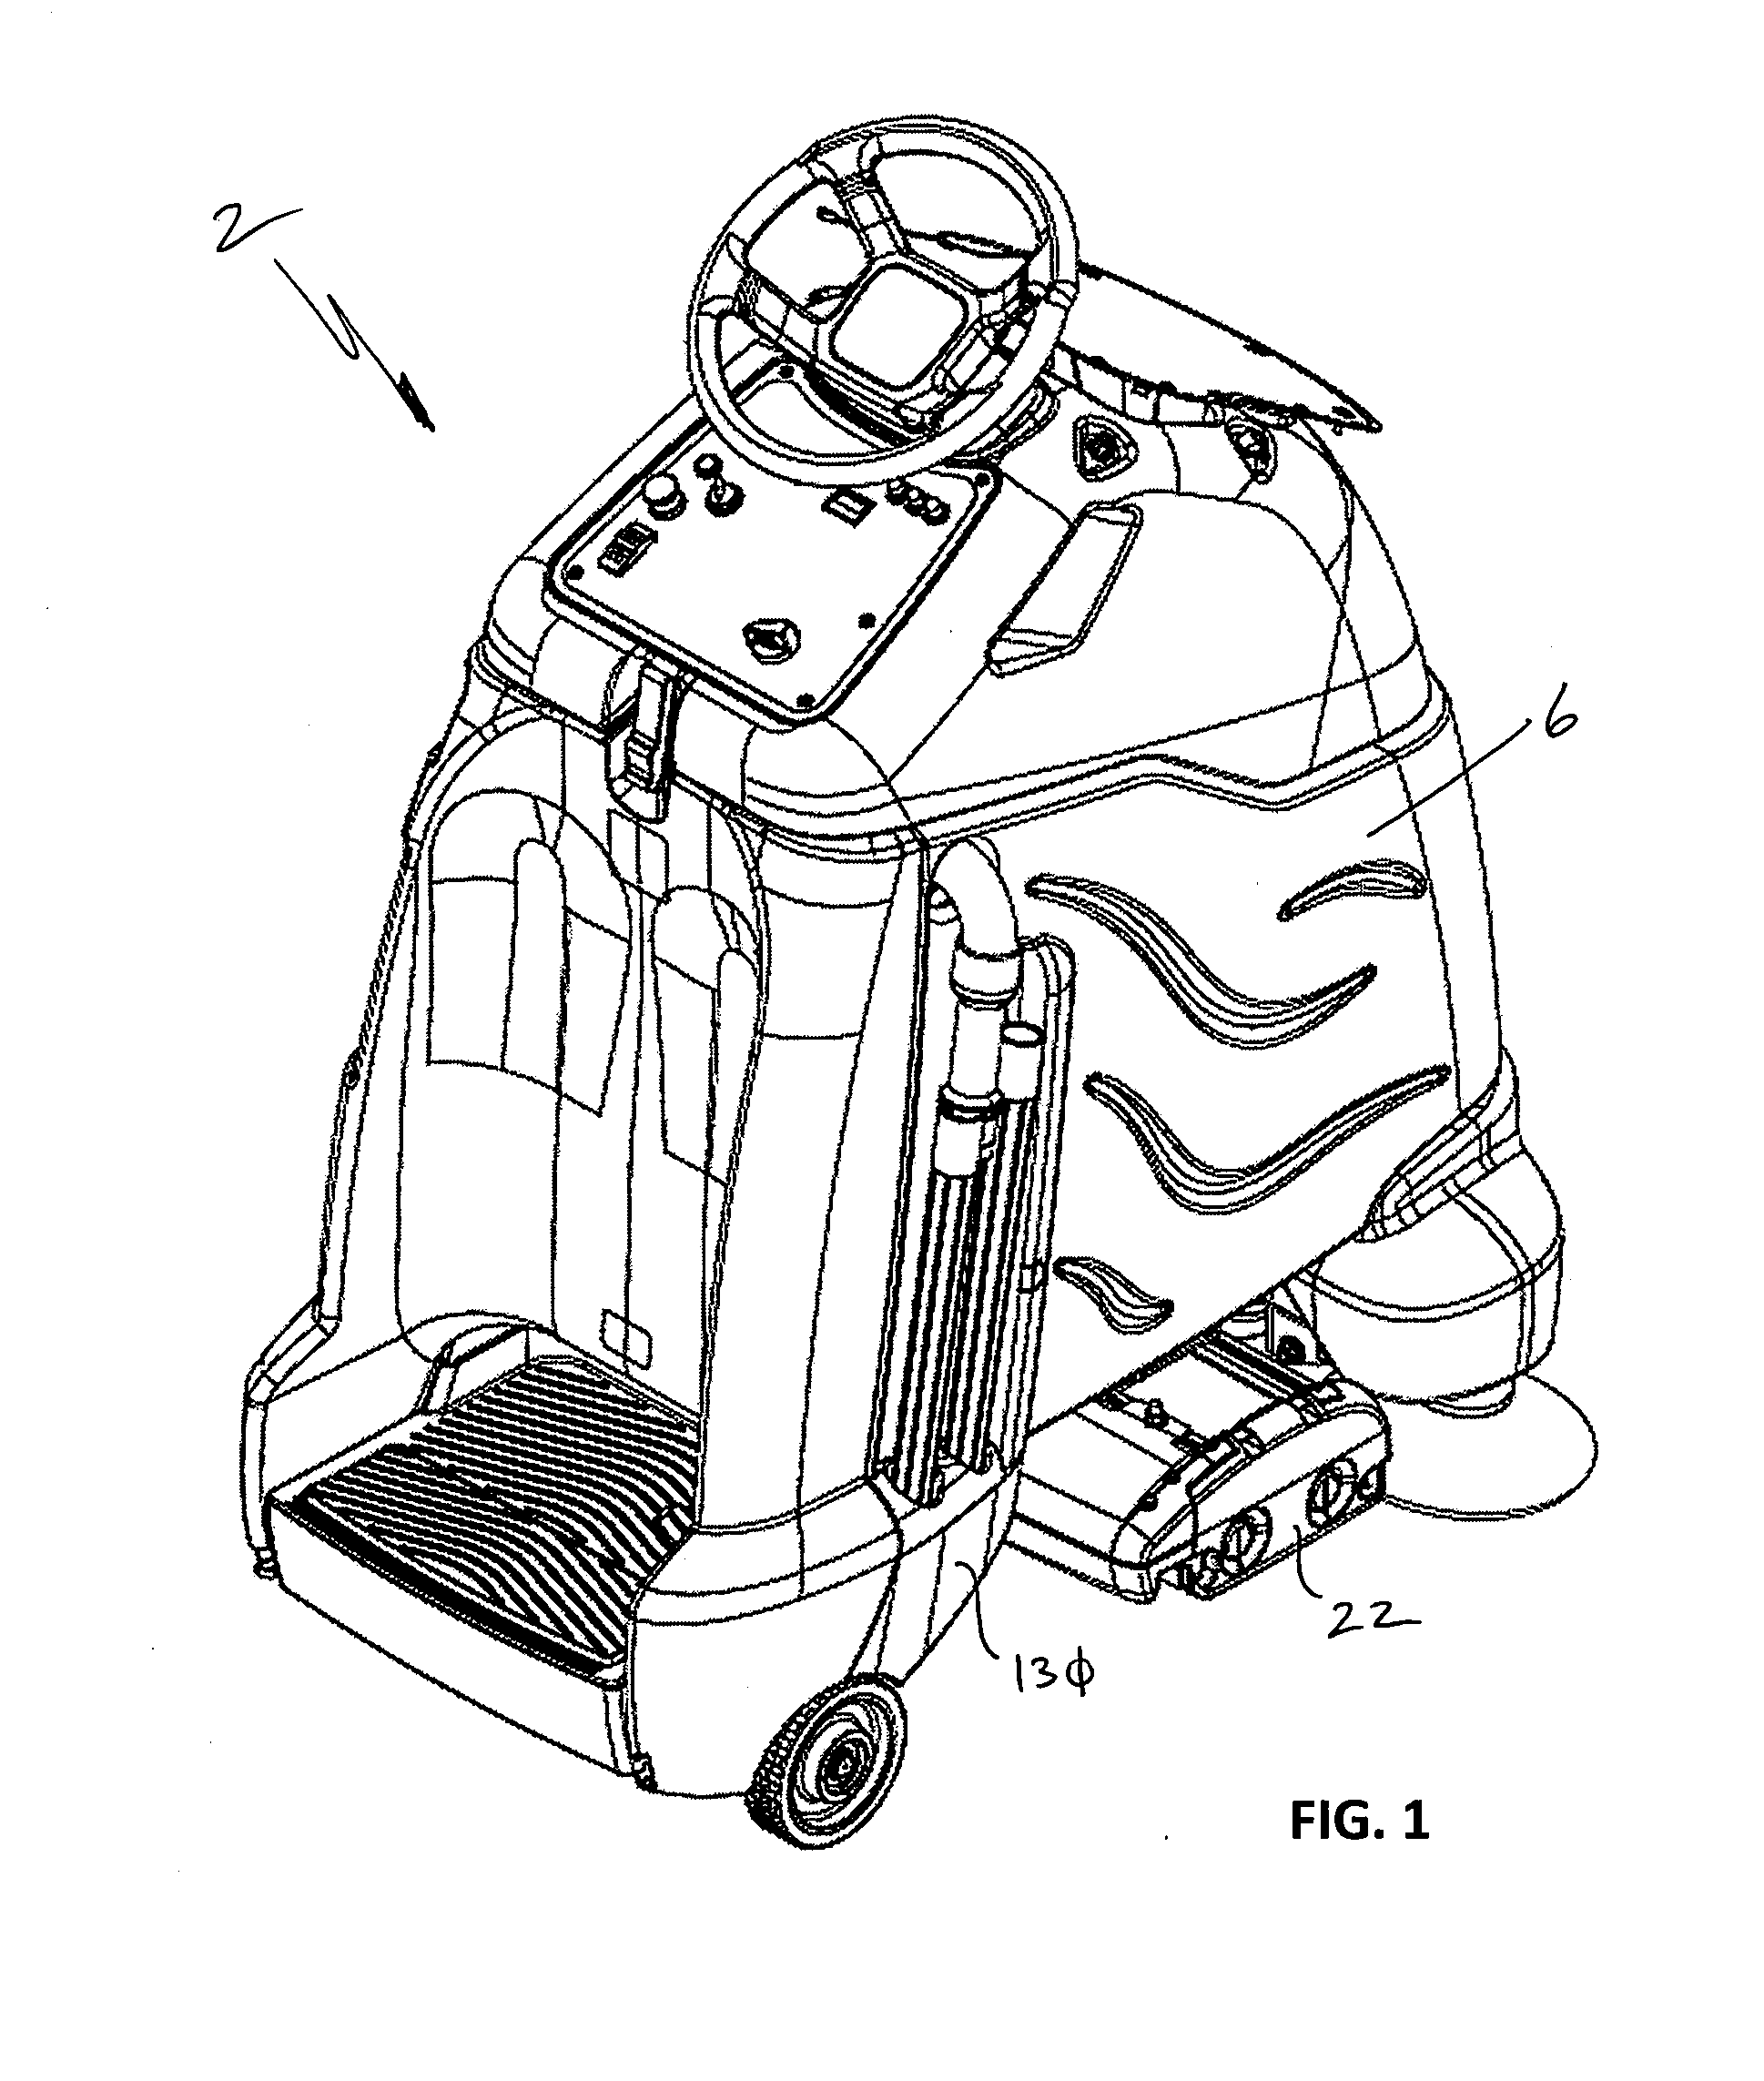 Floor cleaning apparatus employing a combined sweeper and vaccum assembly